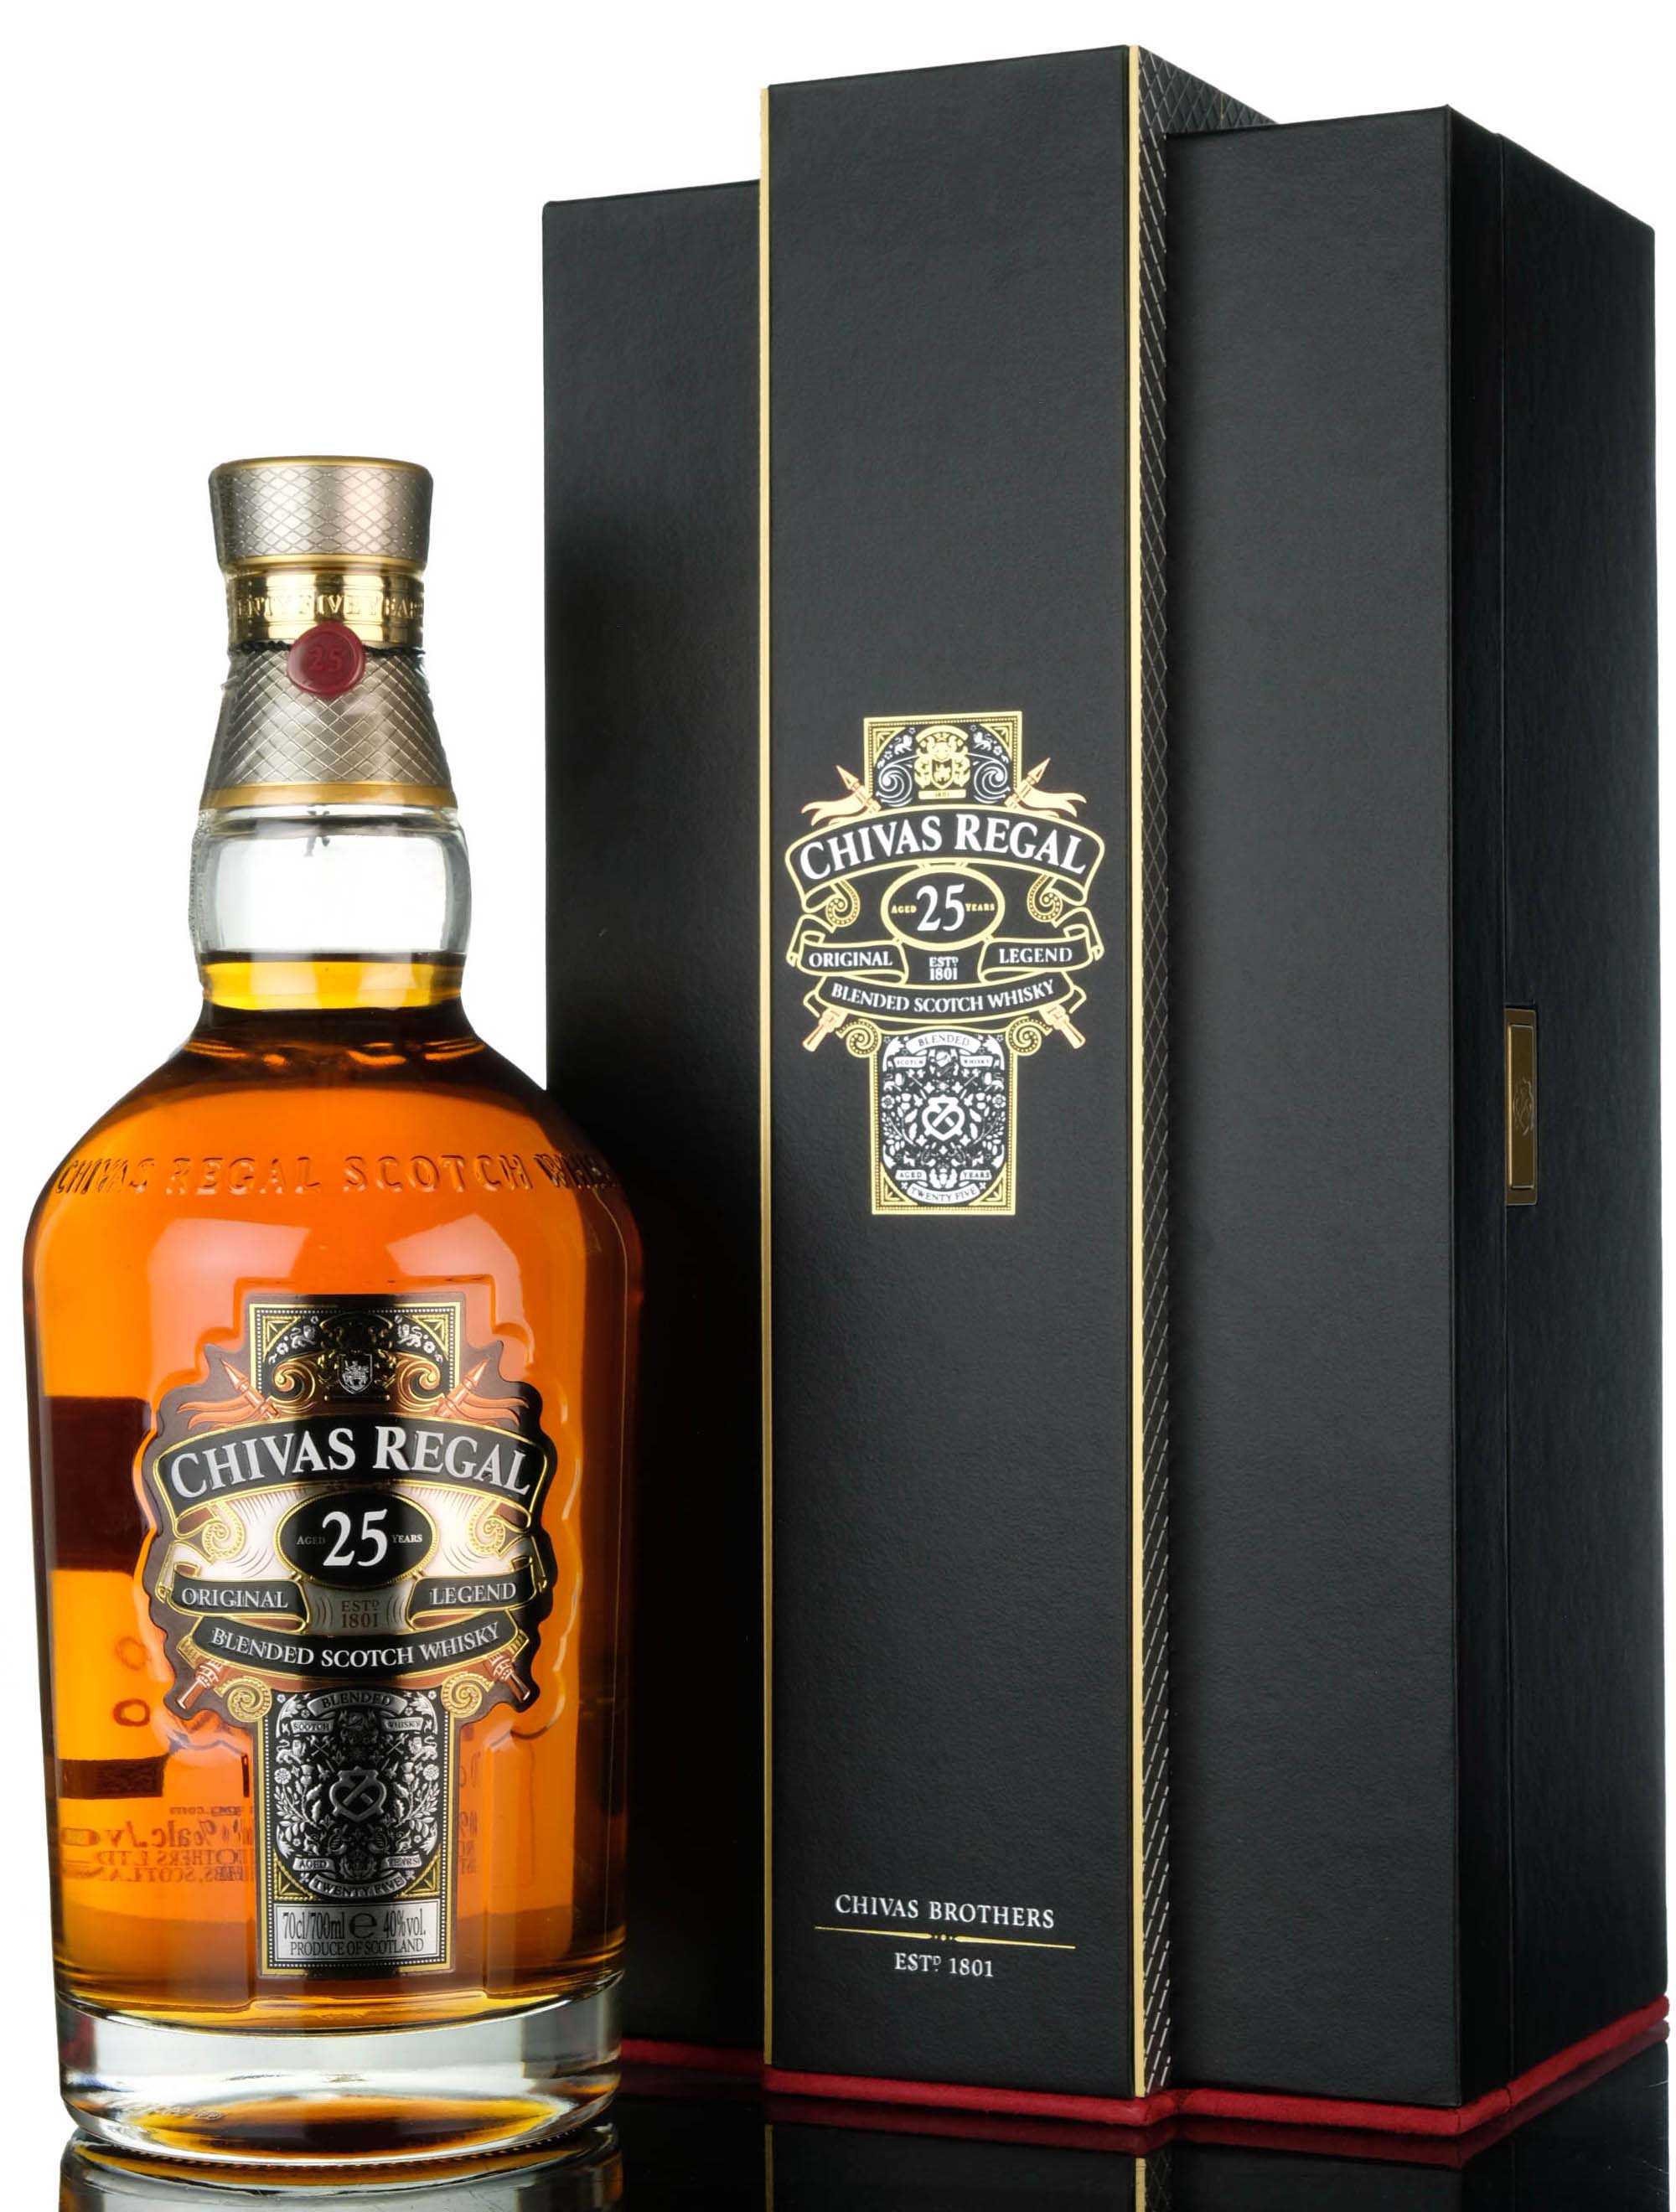 Chivas Regal 25 Year Old - Limited Edition - 2018 Release